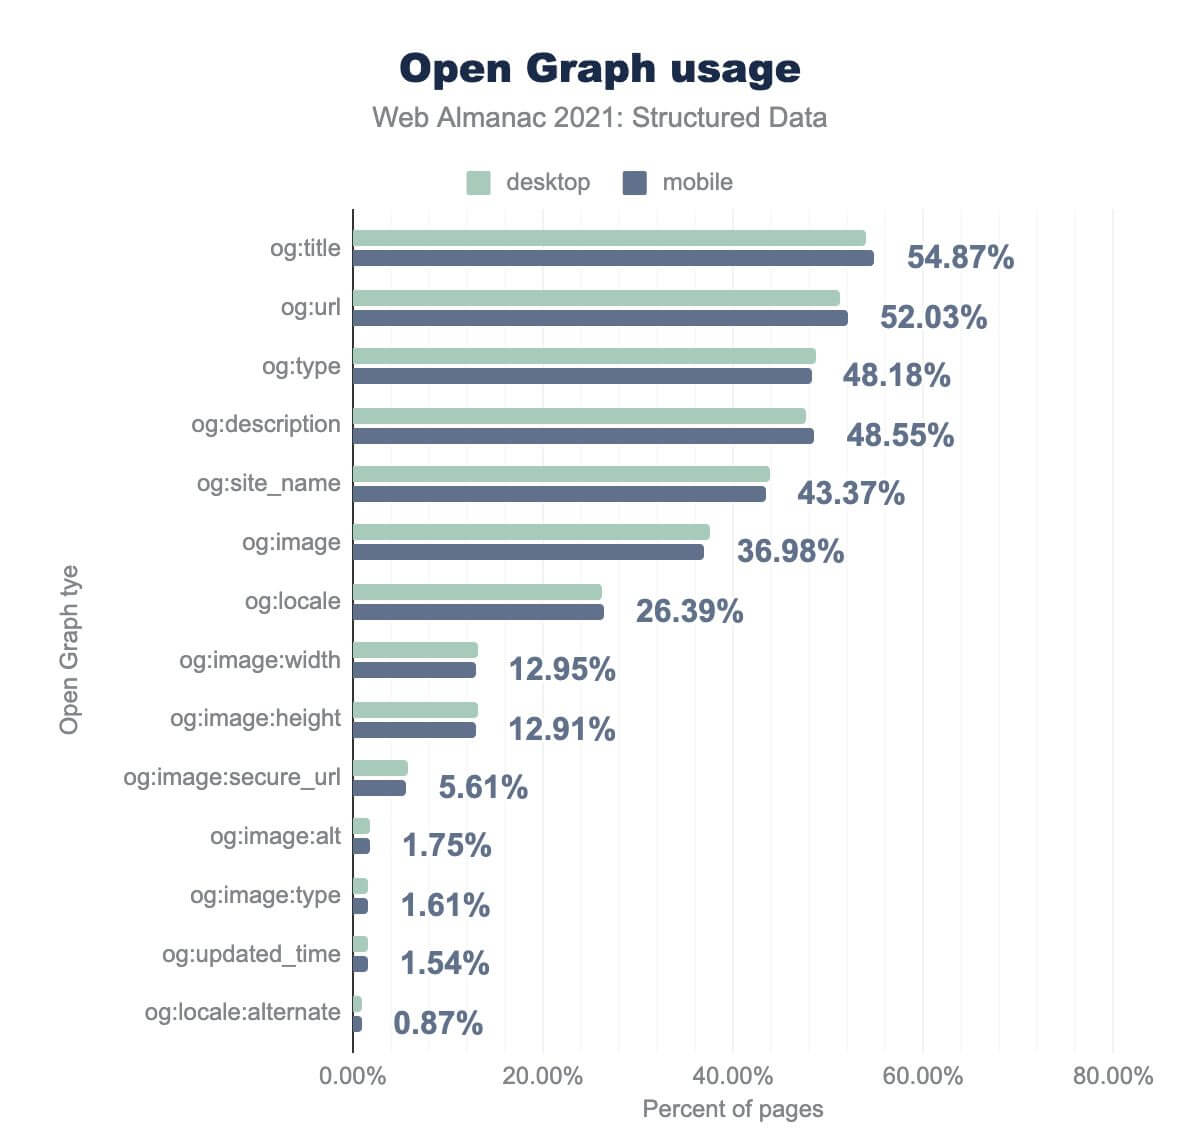 Open Graph usage